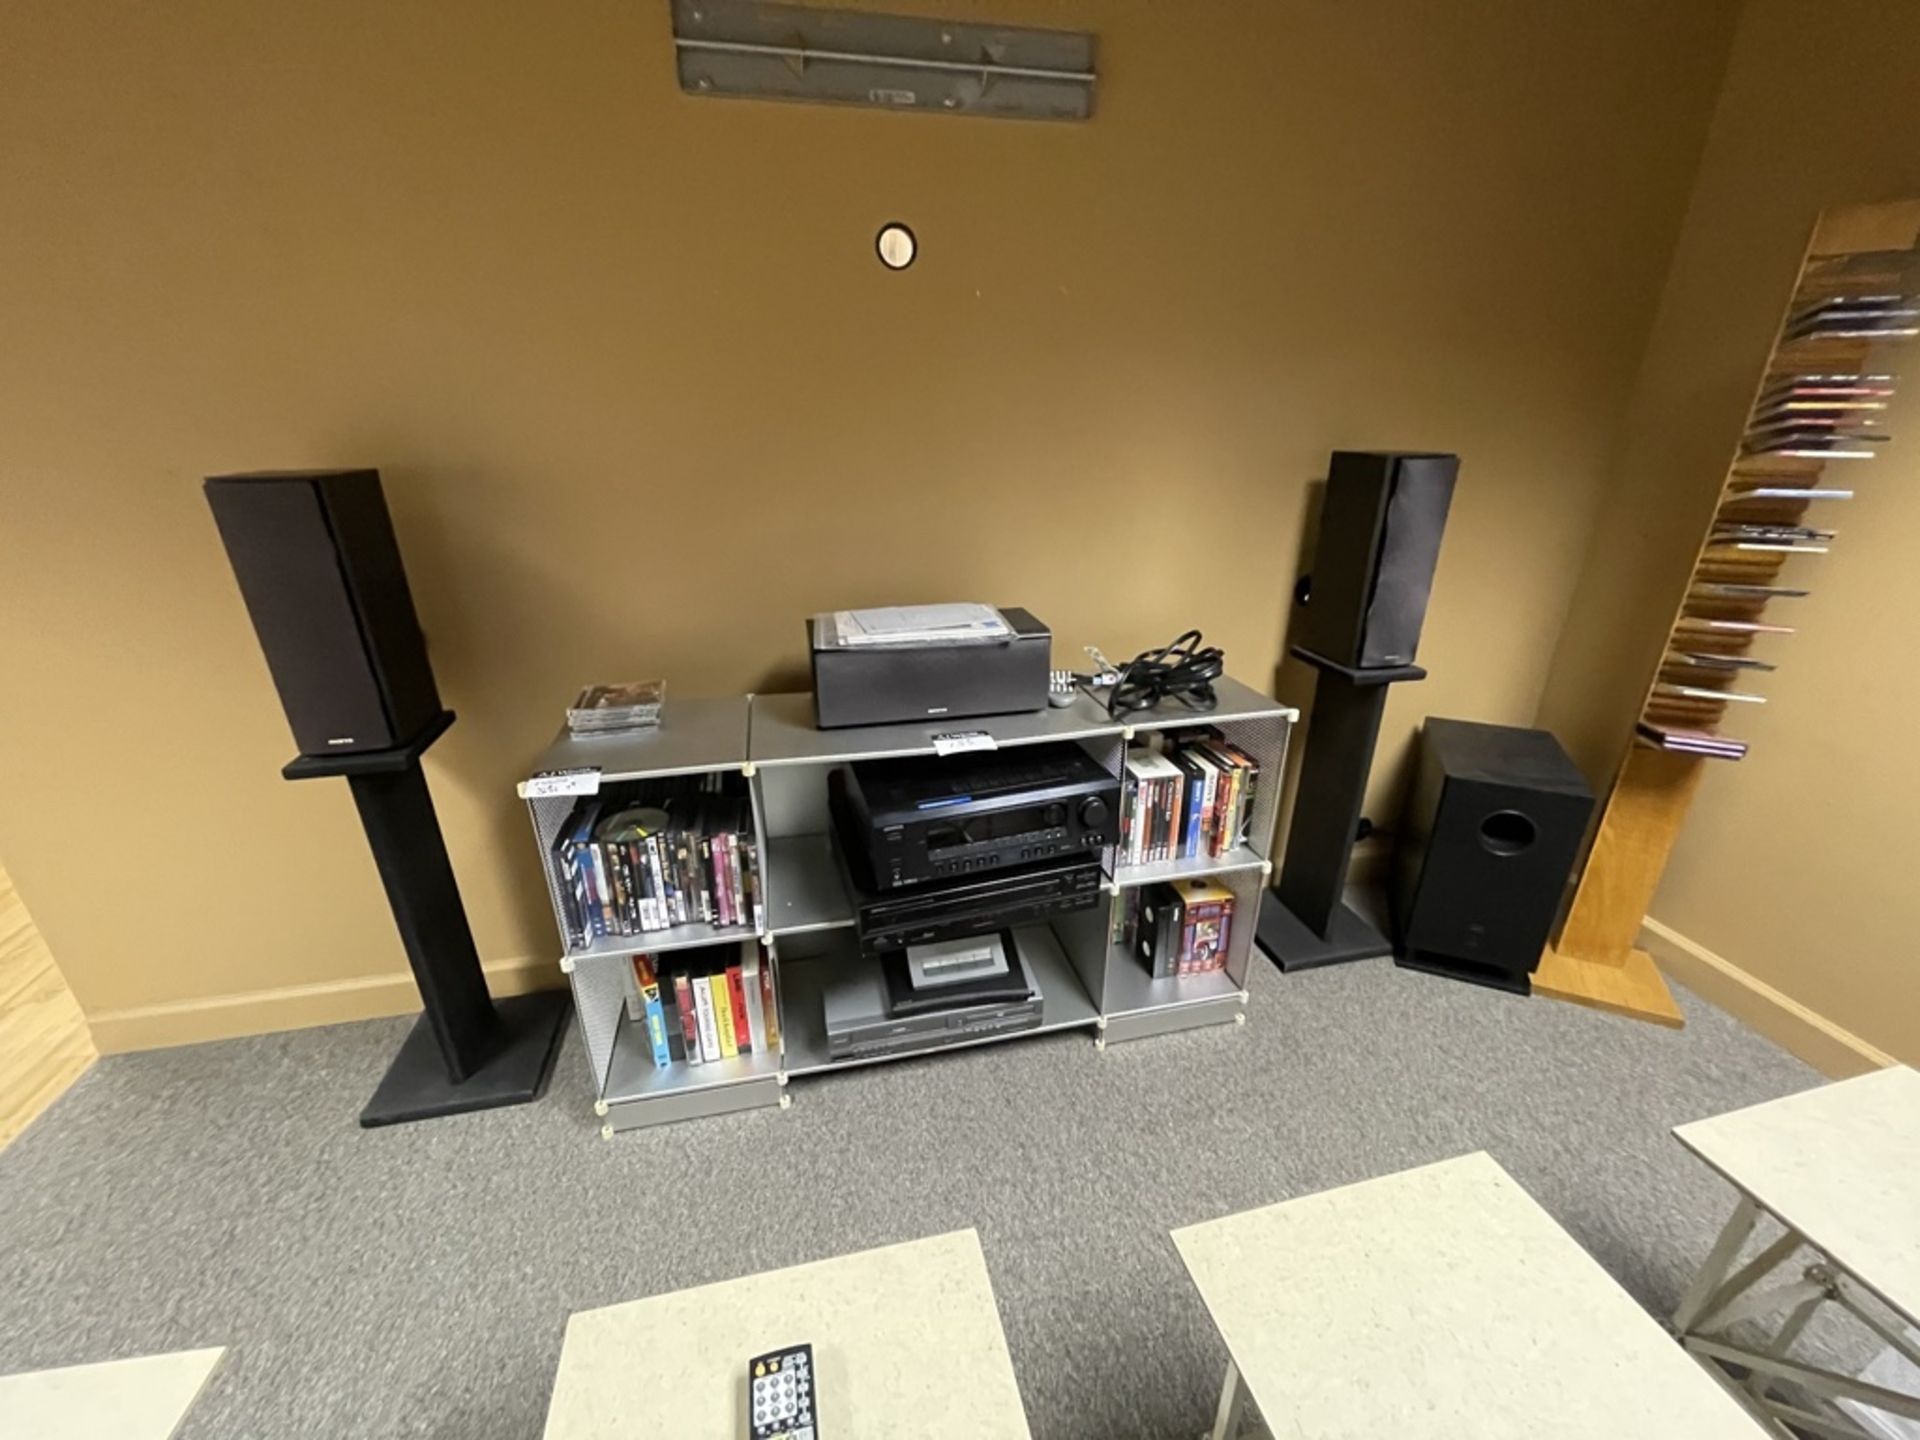 {lot} Home Theater System w/ Onkyo Reciever, Amp, DVD, Denon CD, Speakers, Sub & Ass't DVD's